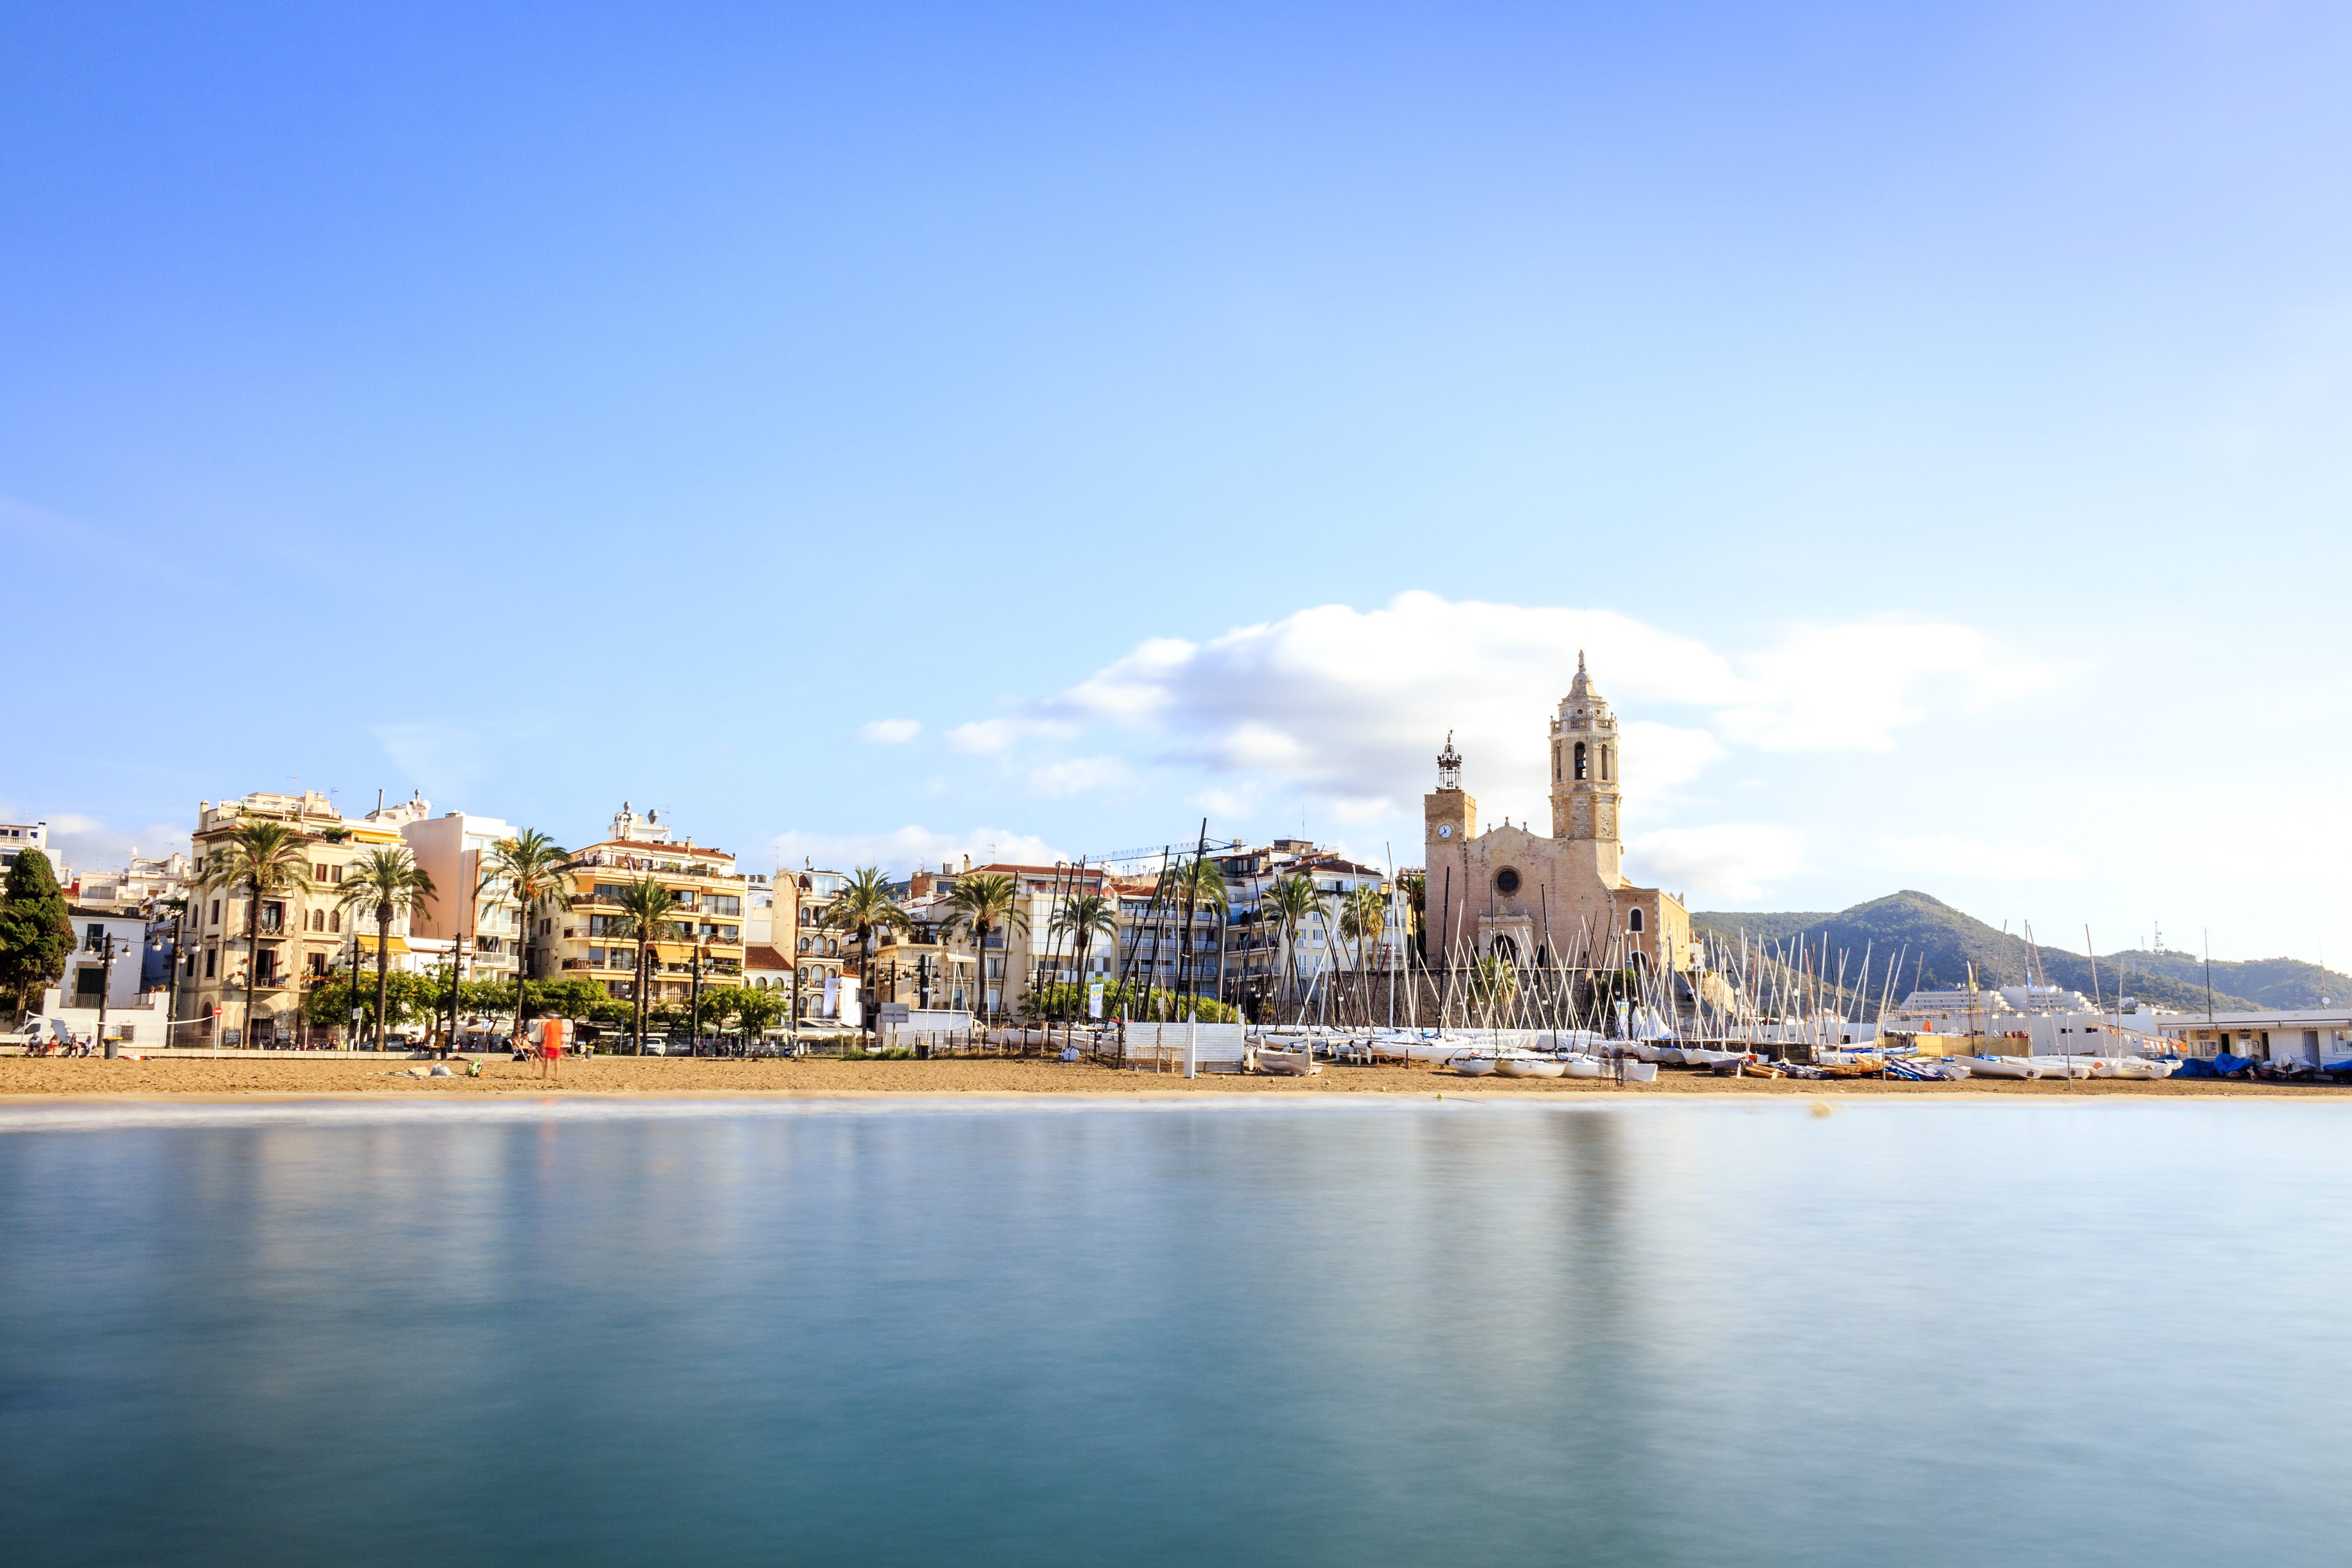 City center of beautiful Sitges, Catalonia, Spain